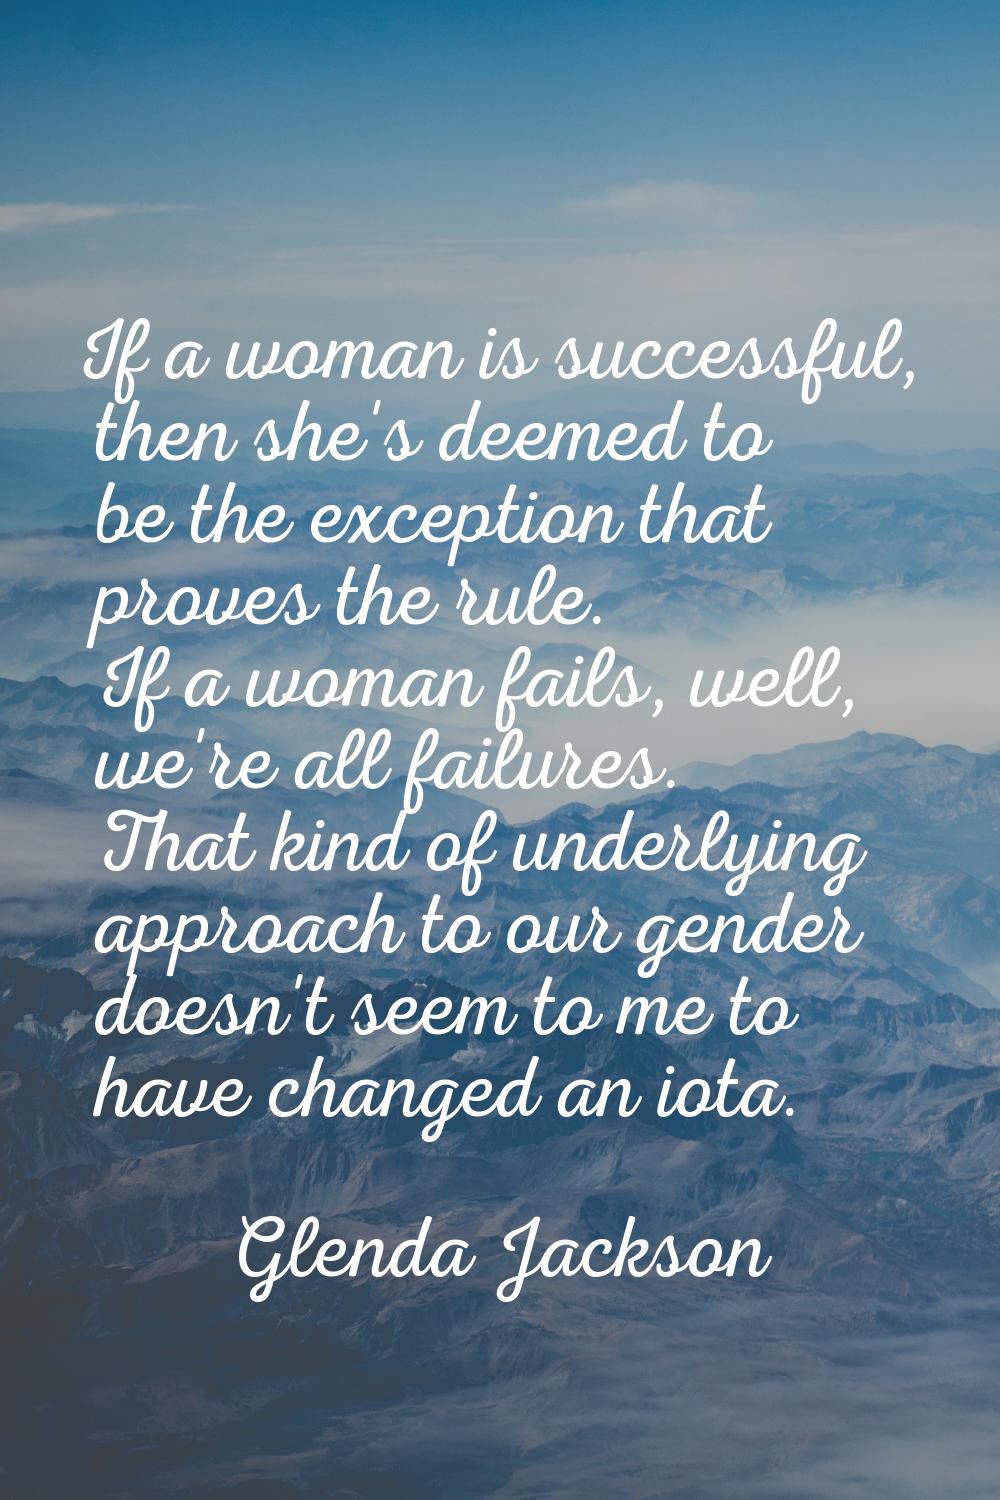 If a woman is successful, then she's deemed to be the exception that proves the rule. If a woman fa